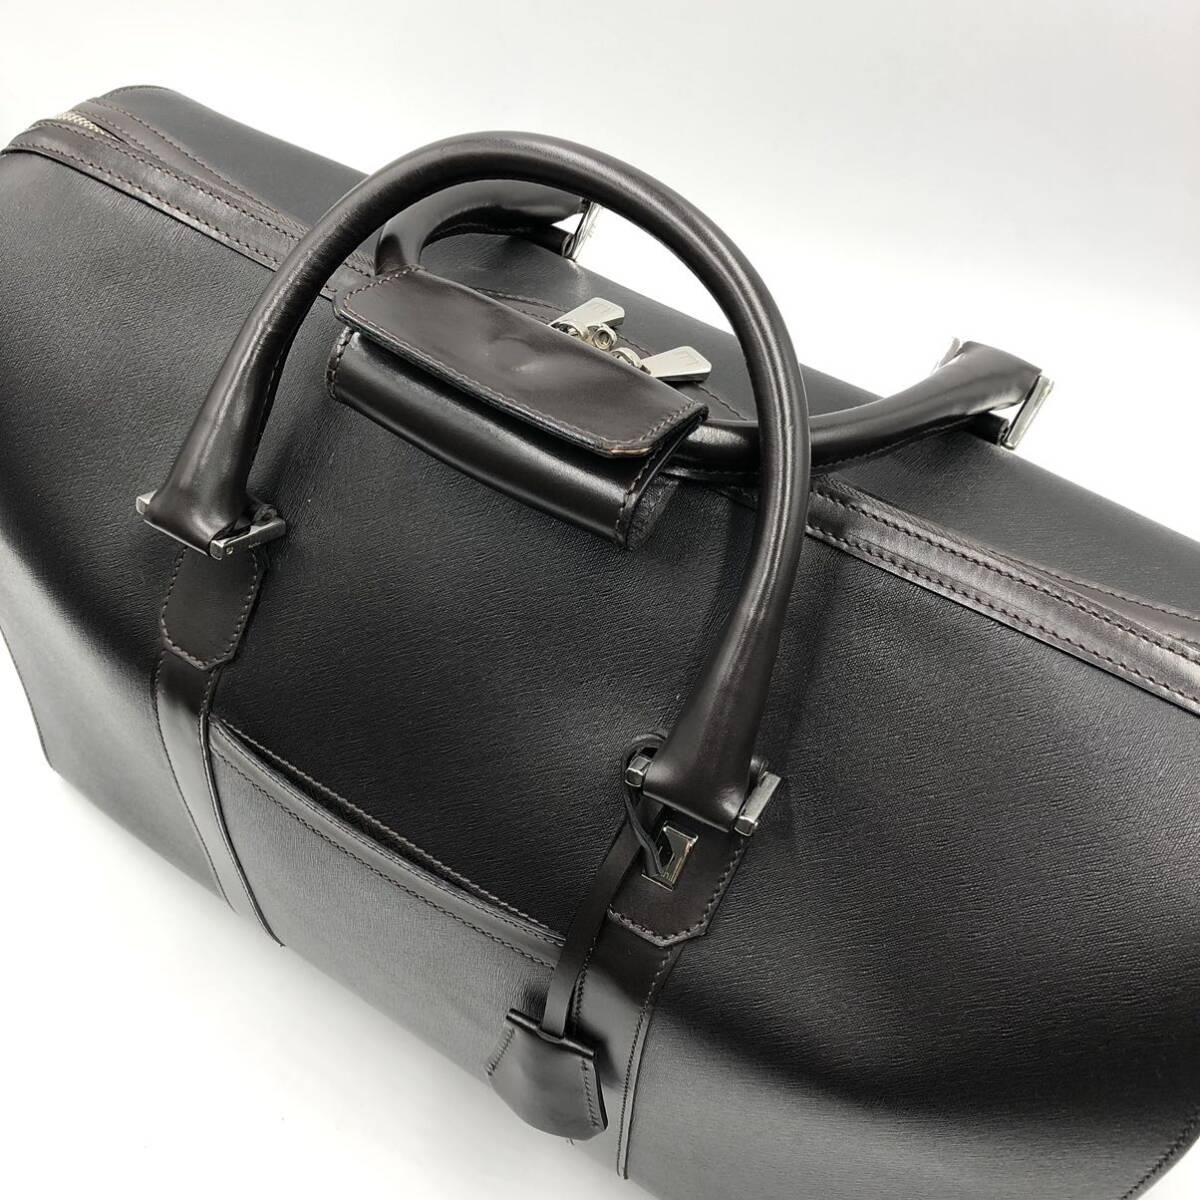 1 jpy ~ dunhill Dunhill side-car Boston bag high capacity 2.3 day business trip travel hand business SV metal fittings all leather original leather dark brown 